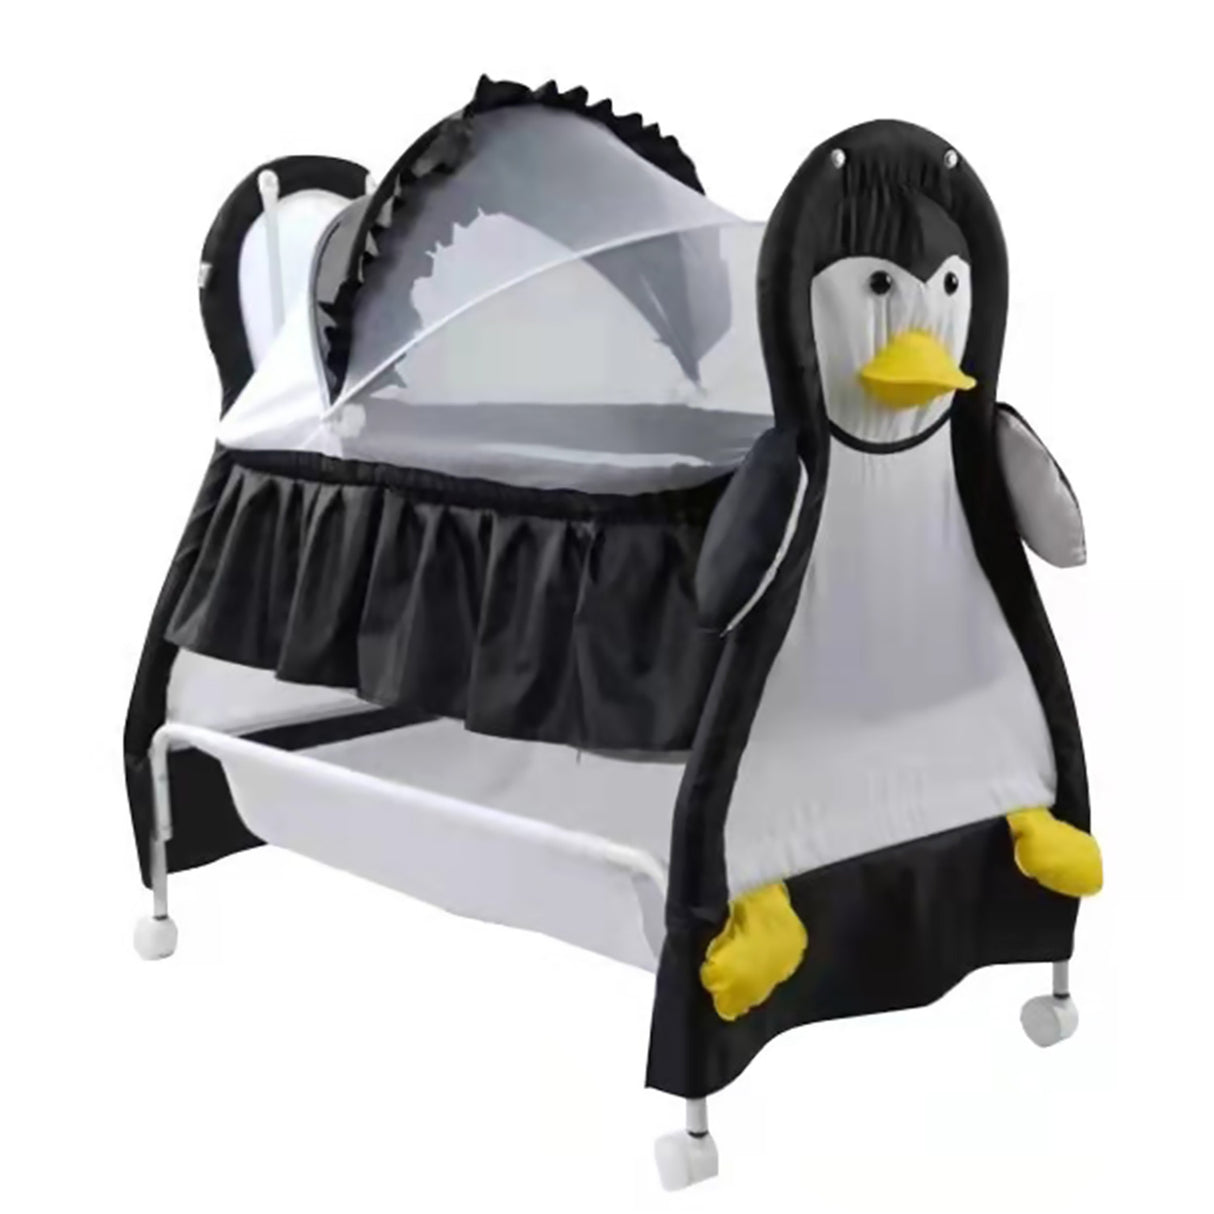 Penguin Comfort And Luxurious Cradle With Mosquito Net